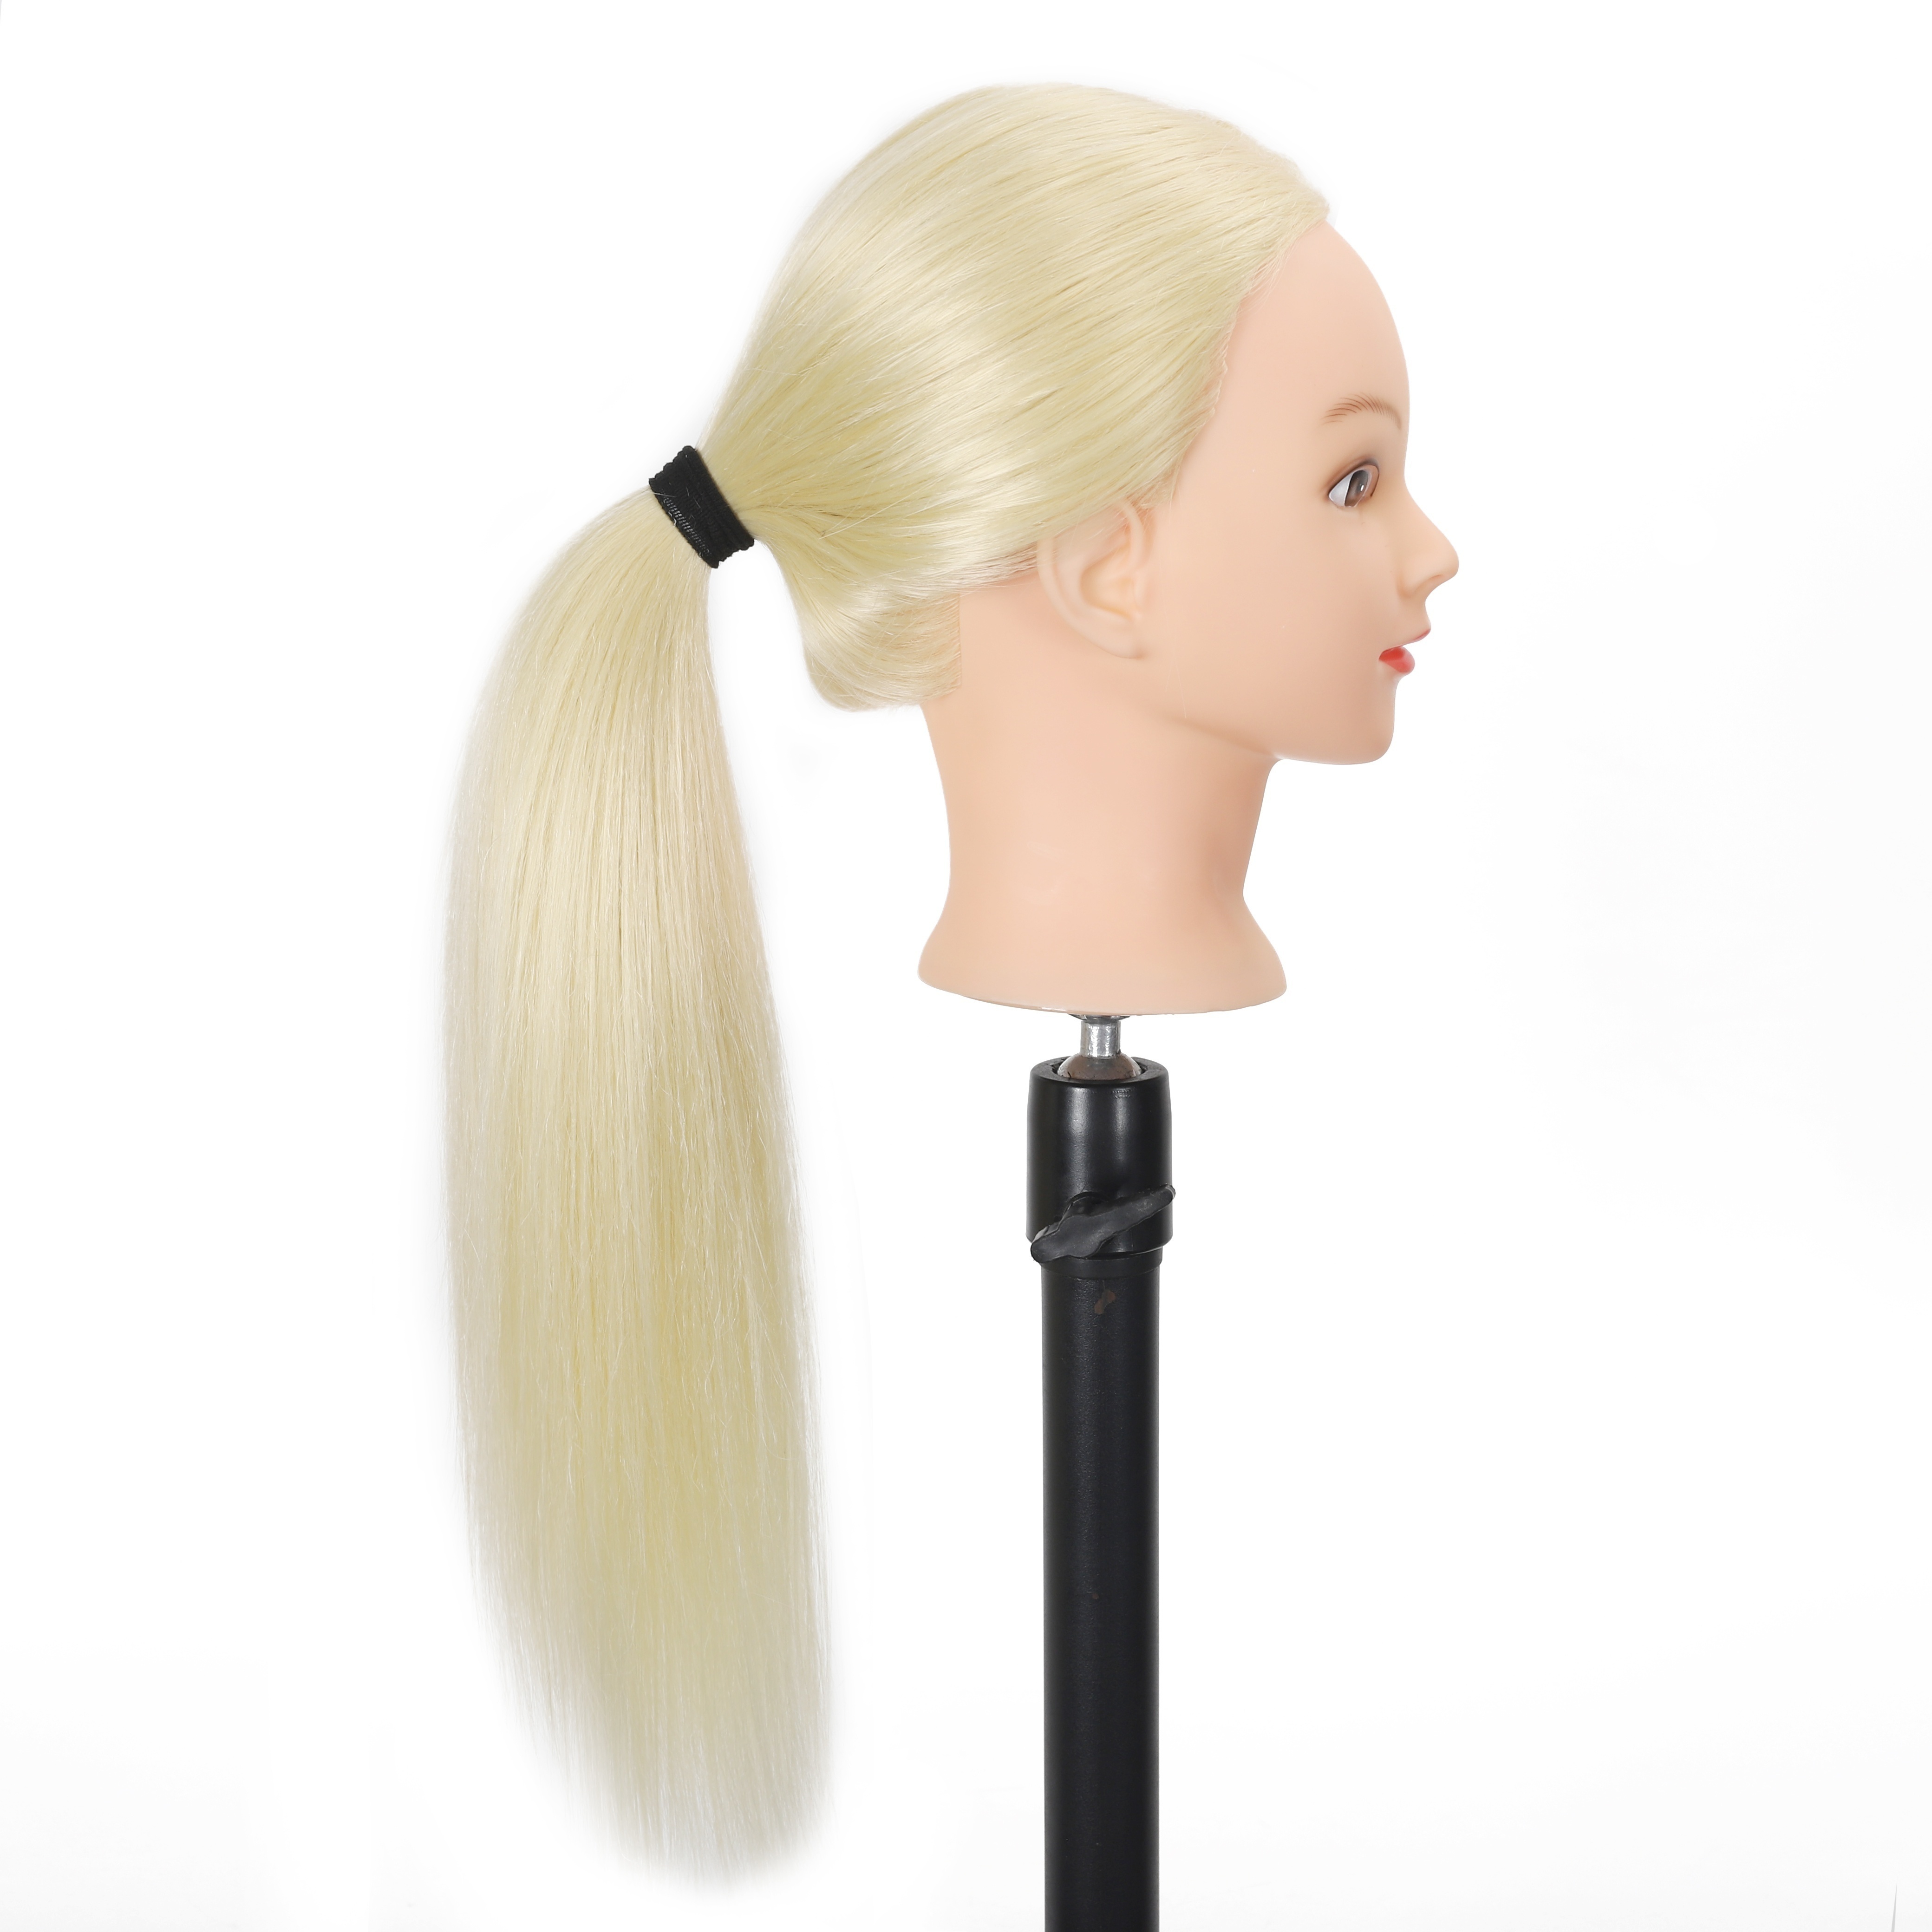 Mannequin Head With Hair, Braiding Mannequin Head Durable For